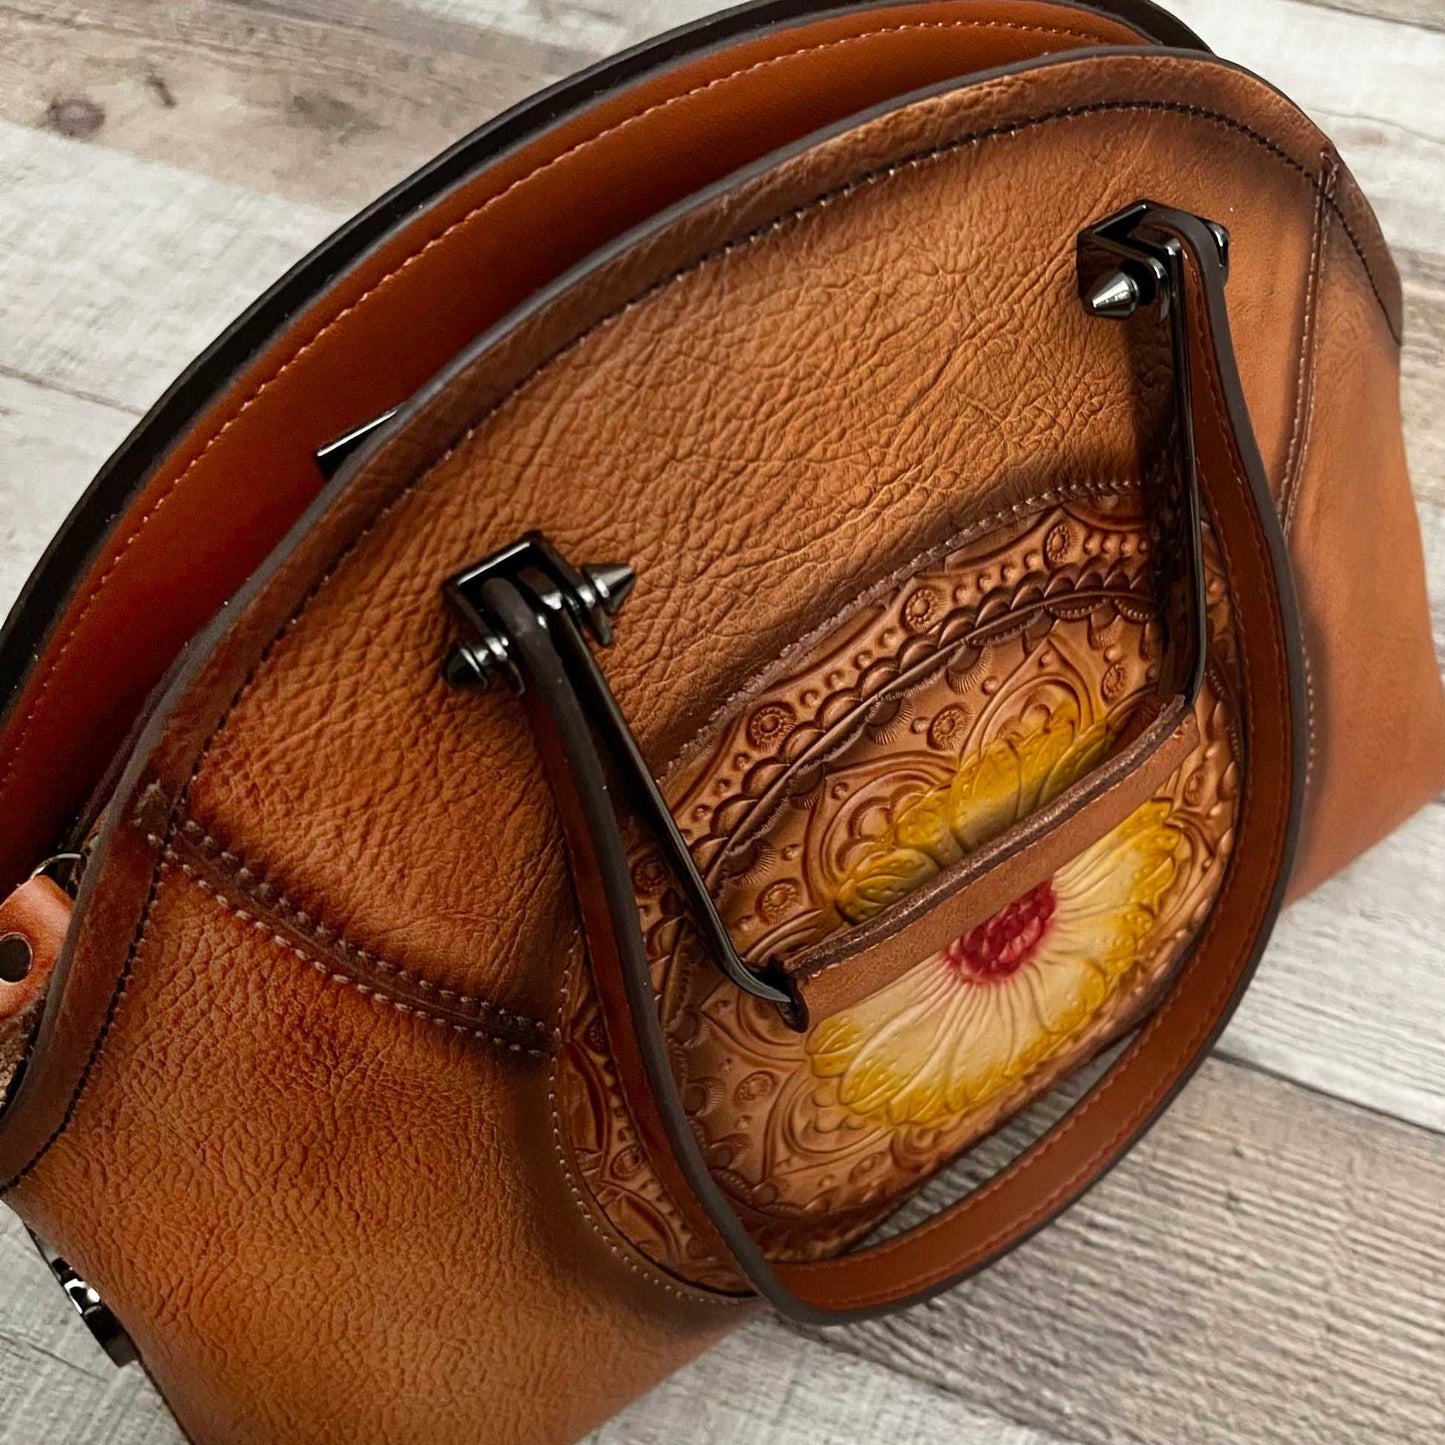 “SUNFLOWER BLAST” Genuine Tooled Leather Bag With Vegan Leather Accents and Shoulder Strap